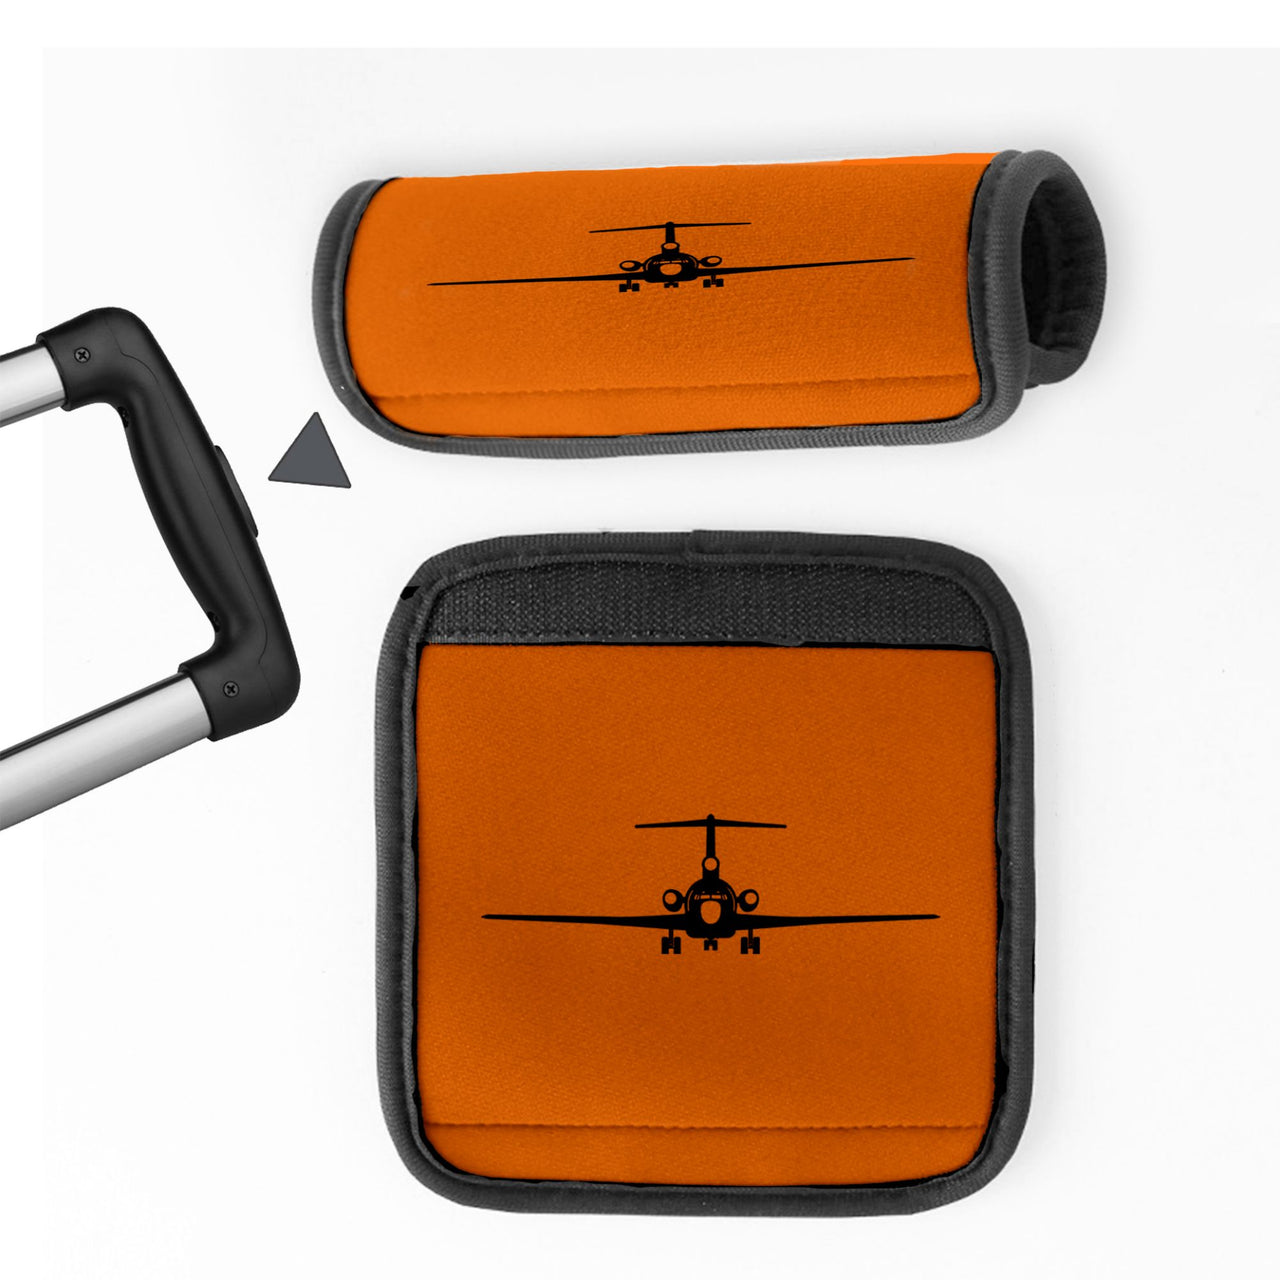 Boeing 727 Silhouette Designed Neoprene Luggage Handle Covers